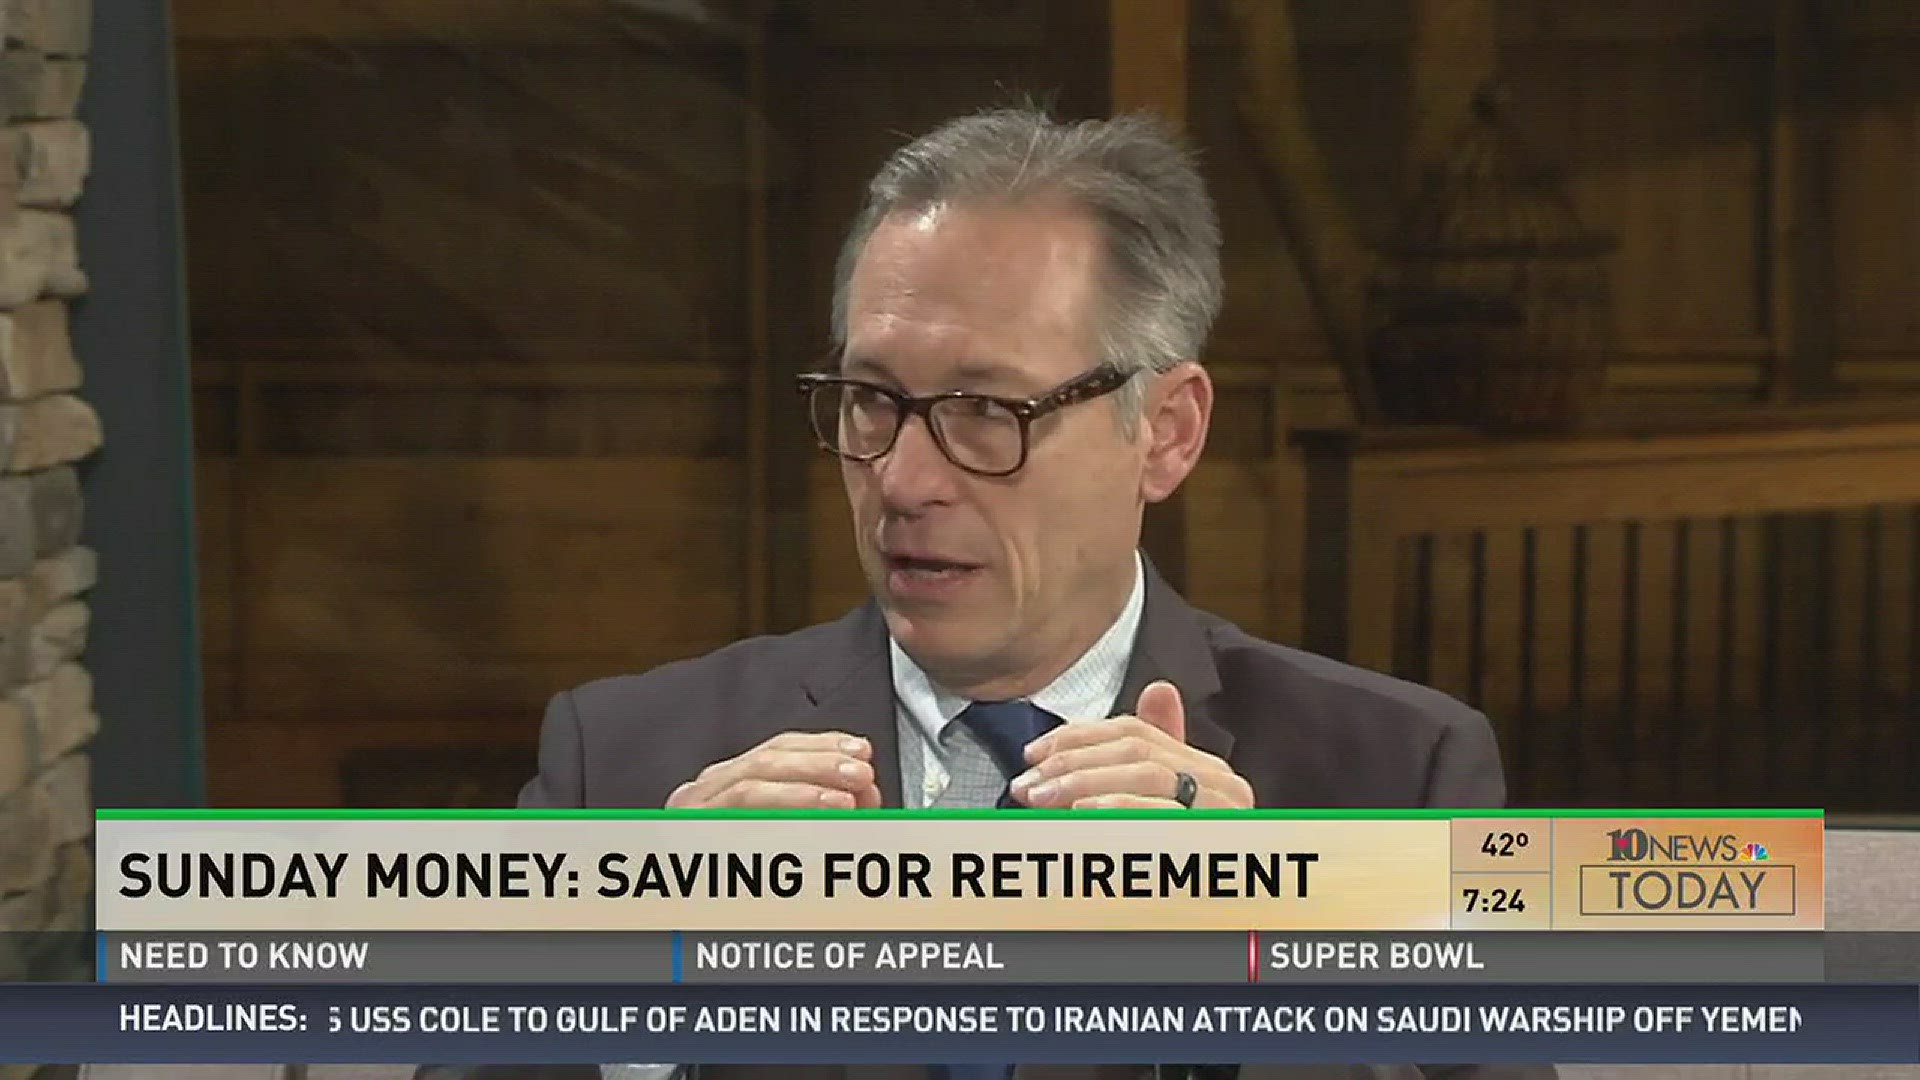 Certified financial planner Paul Fain discusses saving for retirement.